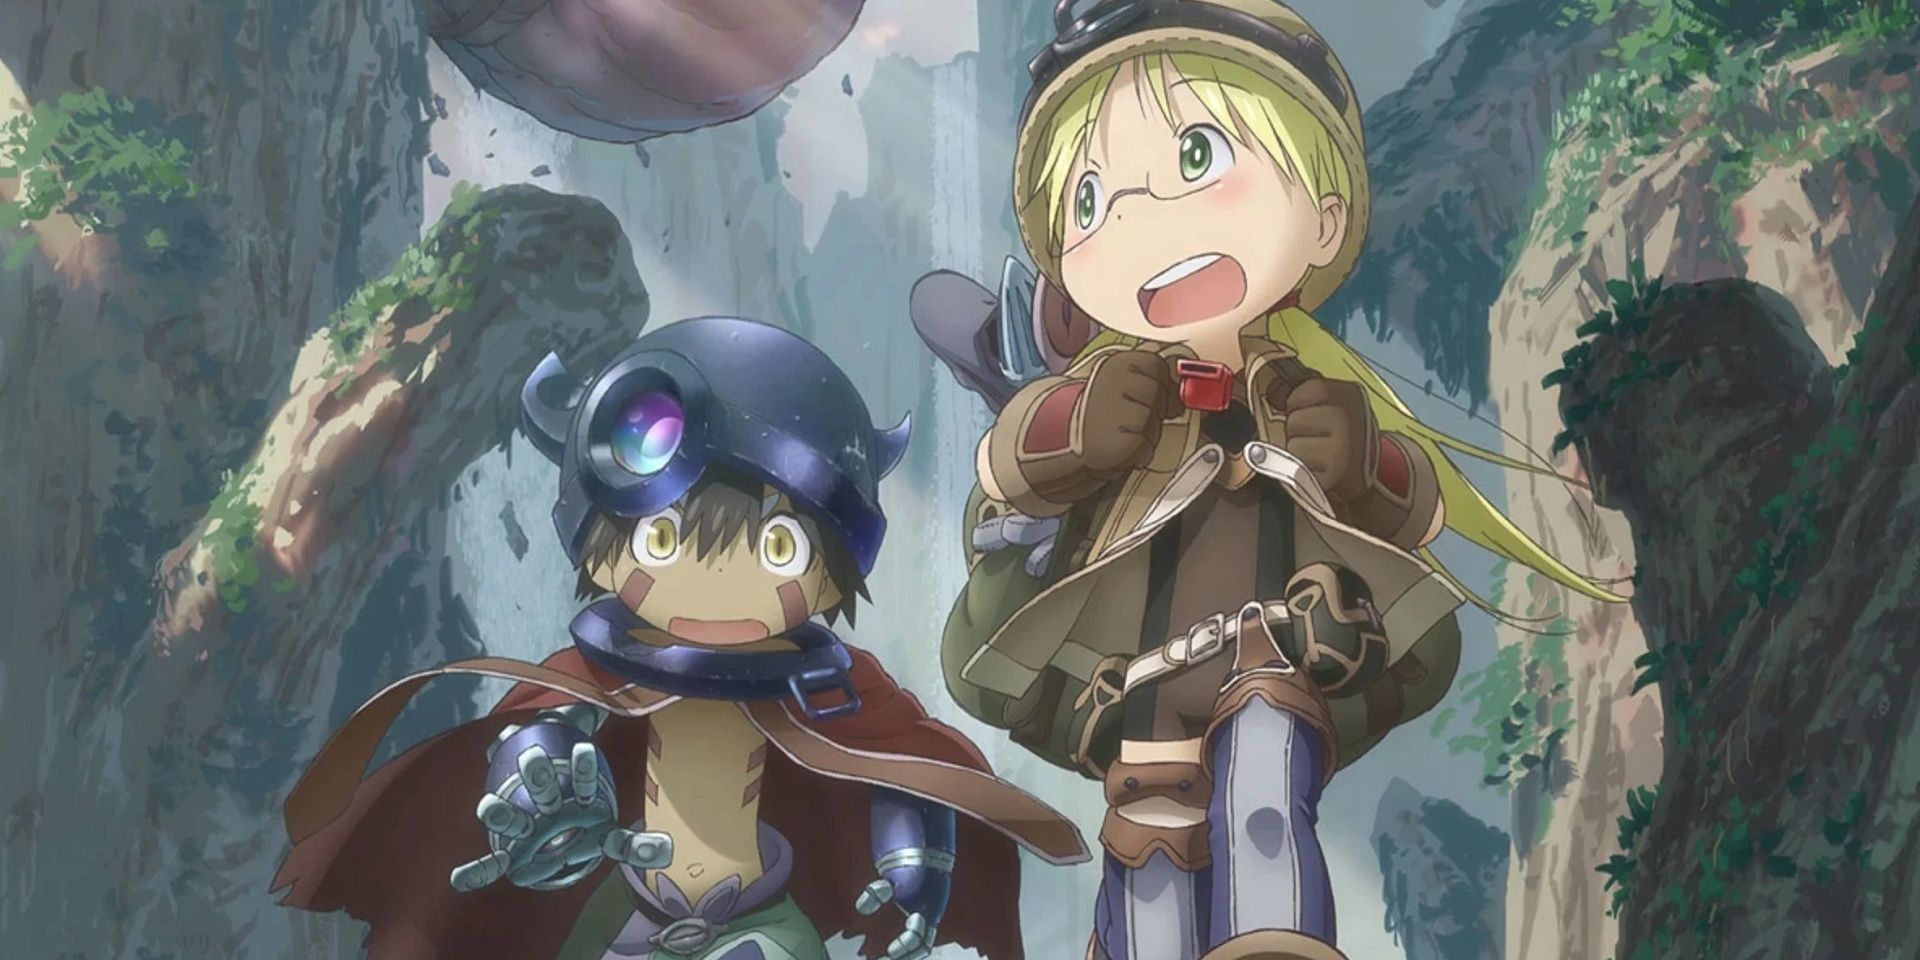 Made in the Abyss: Binary Star Falling Into Darkness